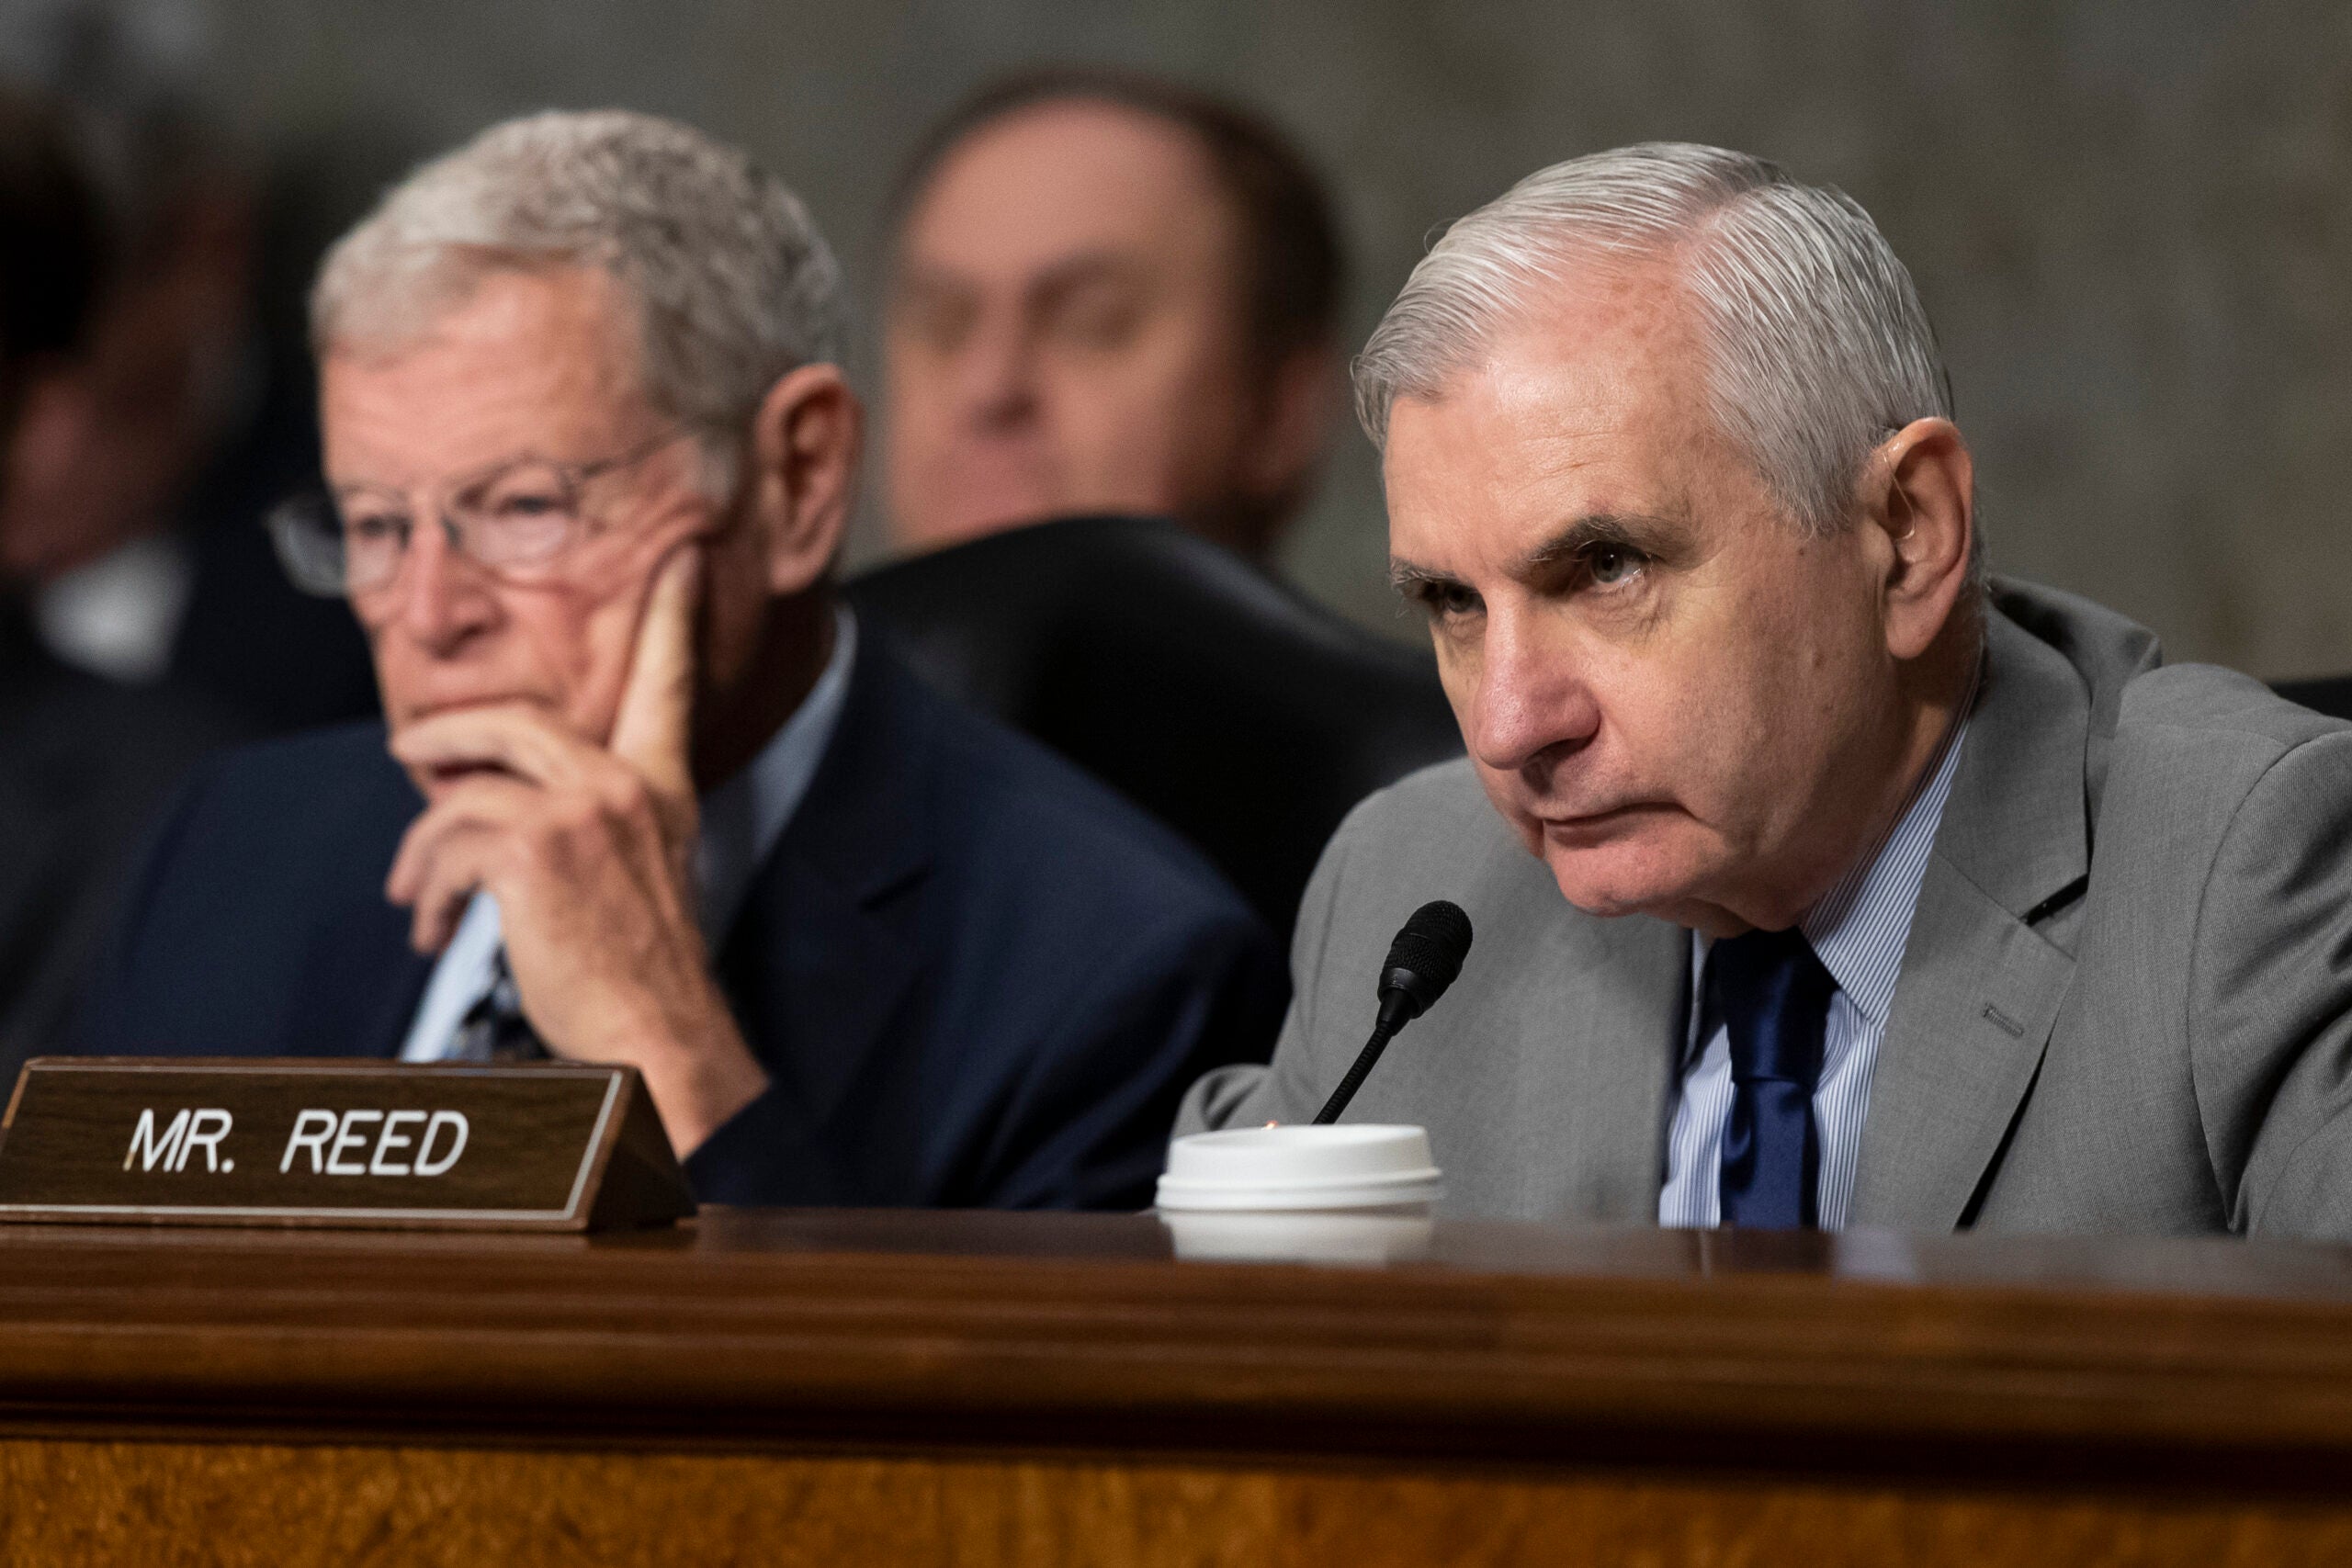 Senate Armed Services Committee Chairman Jim Inhofe, of Oklahoma, listens as Ranking Member Sen. Jack Reed, D-R.I., speaks during a hearing of the Senate Armed Services Committee about about ongoing reports of substandard housing conditions Tuesday, Dec. 3, 2019 in Washington, on Capitol Hill. (AP Photo/Alex Brandon)